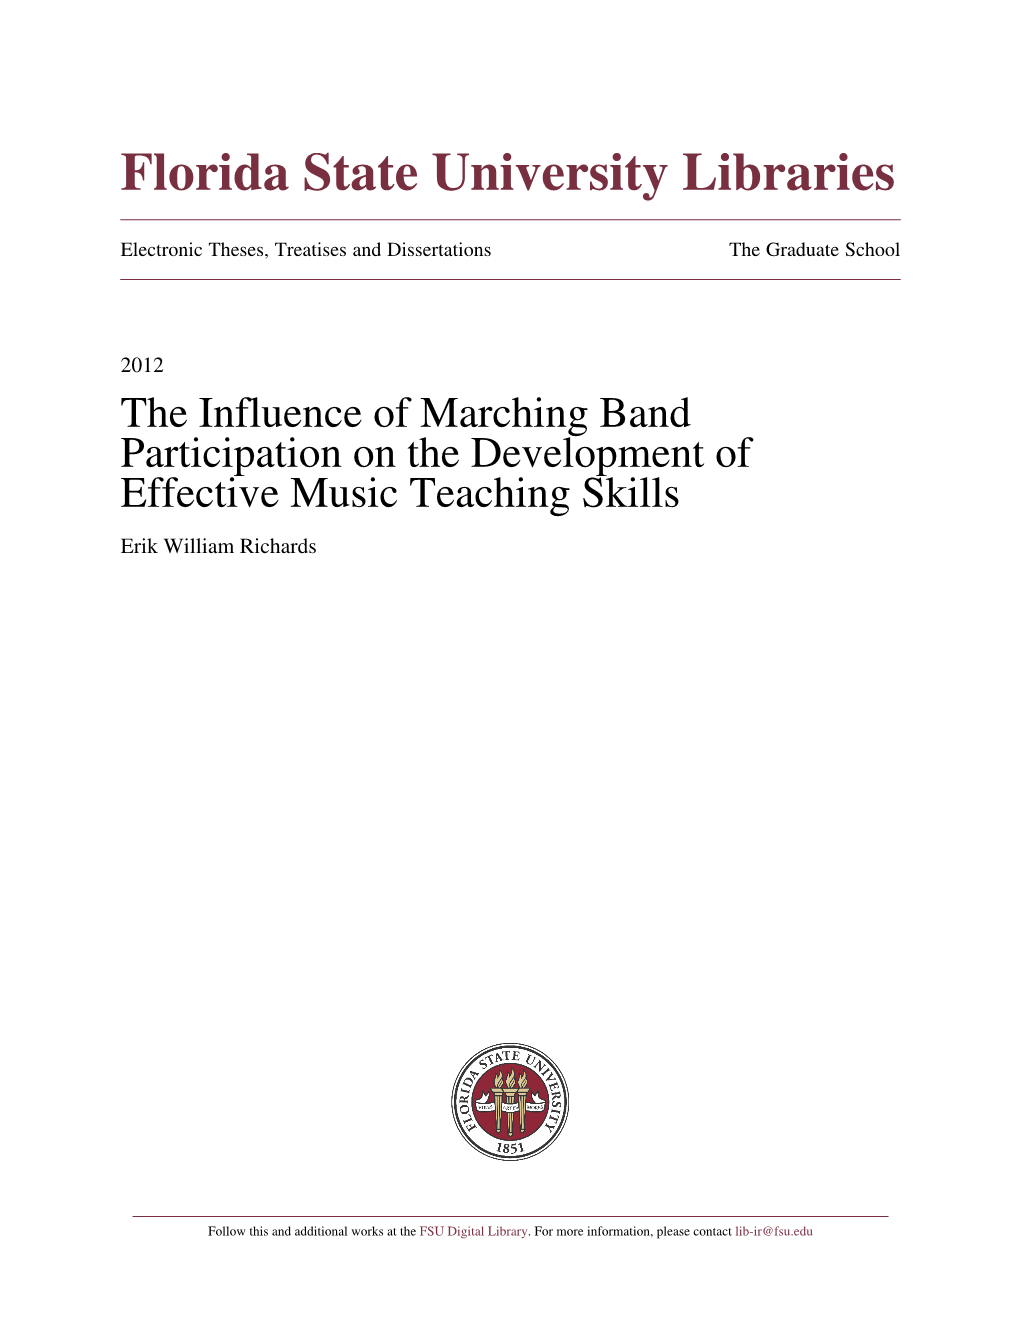 The Influence of Marching Band Participation on the Development of Effective Music Teaching Skills Erik William Richards